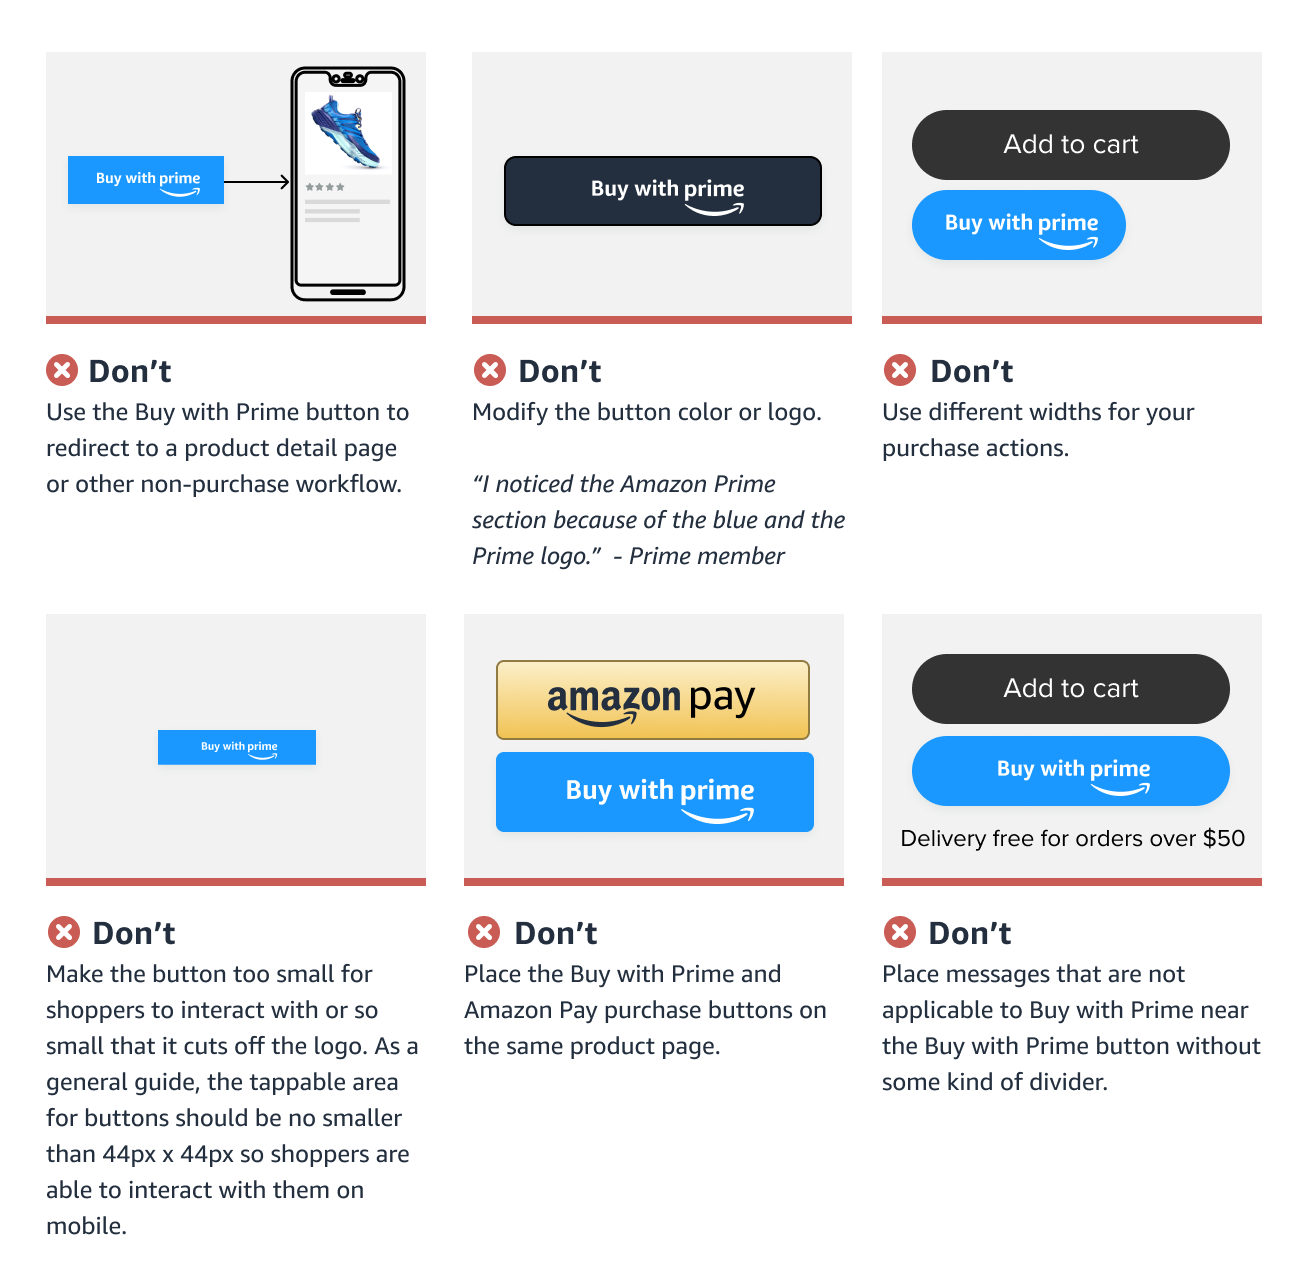 Examples of what not to do with the Buy with Prime button, including linking it to anything that is not a Buy with Prime purchase workflow modifying the button color or logo, using a different width for the button vs. your other purchase buttons, making the button smaller than 44px, placing it next to Amazon Pay buttons or placing messages not applicable to Buy with Prime next to the button (eg. delivery free for orders over $50).